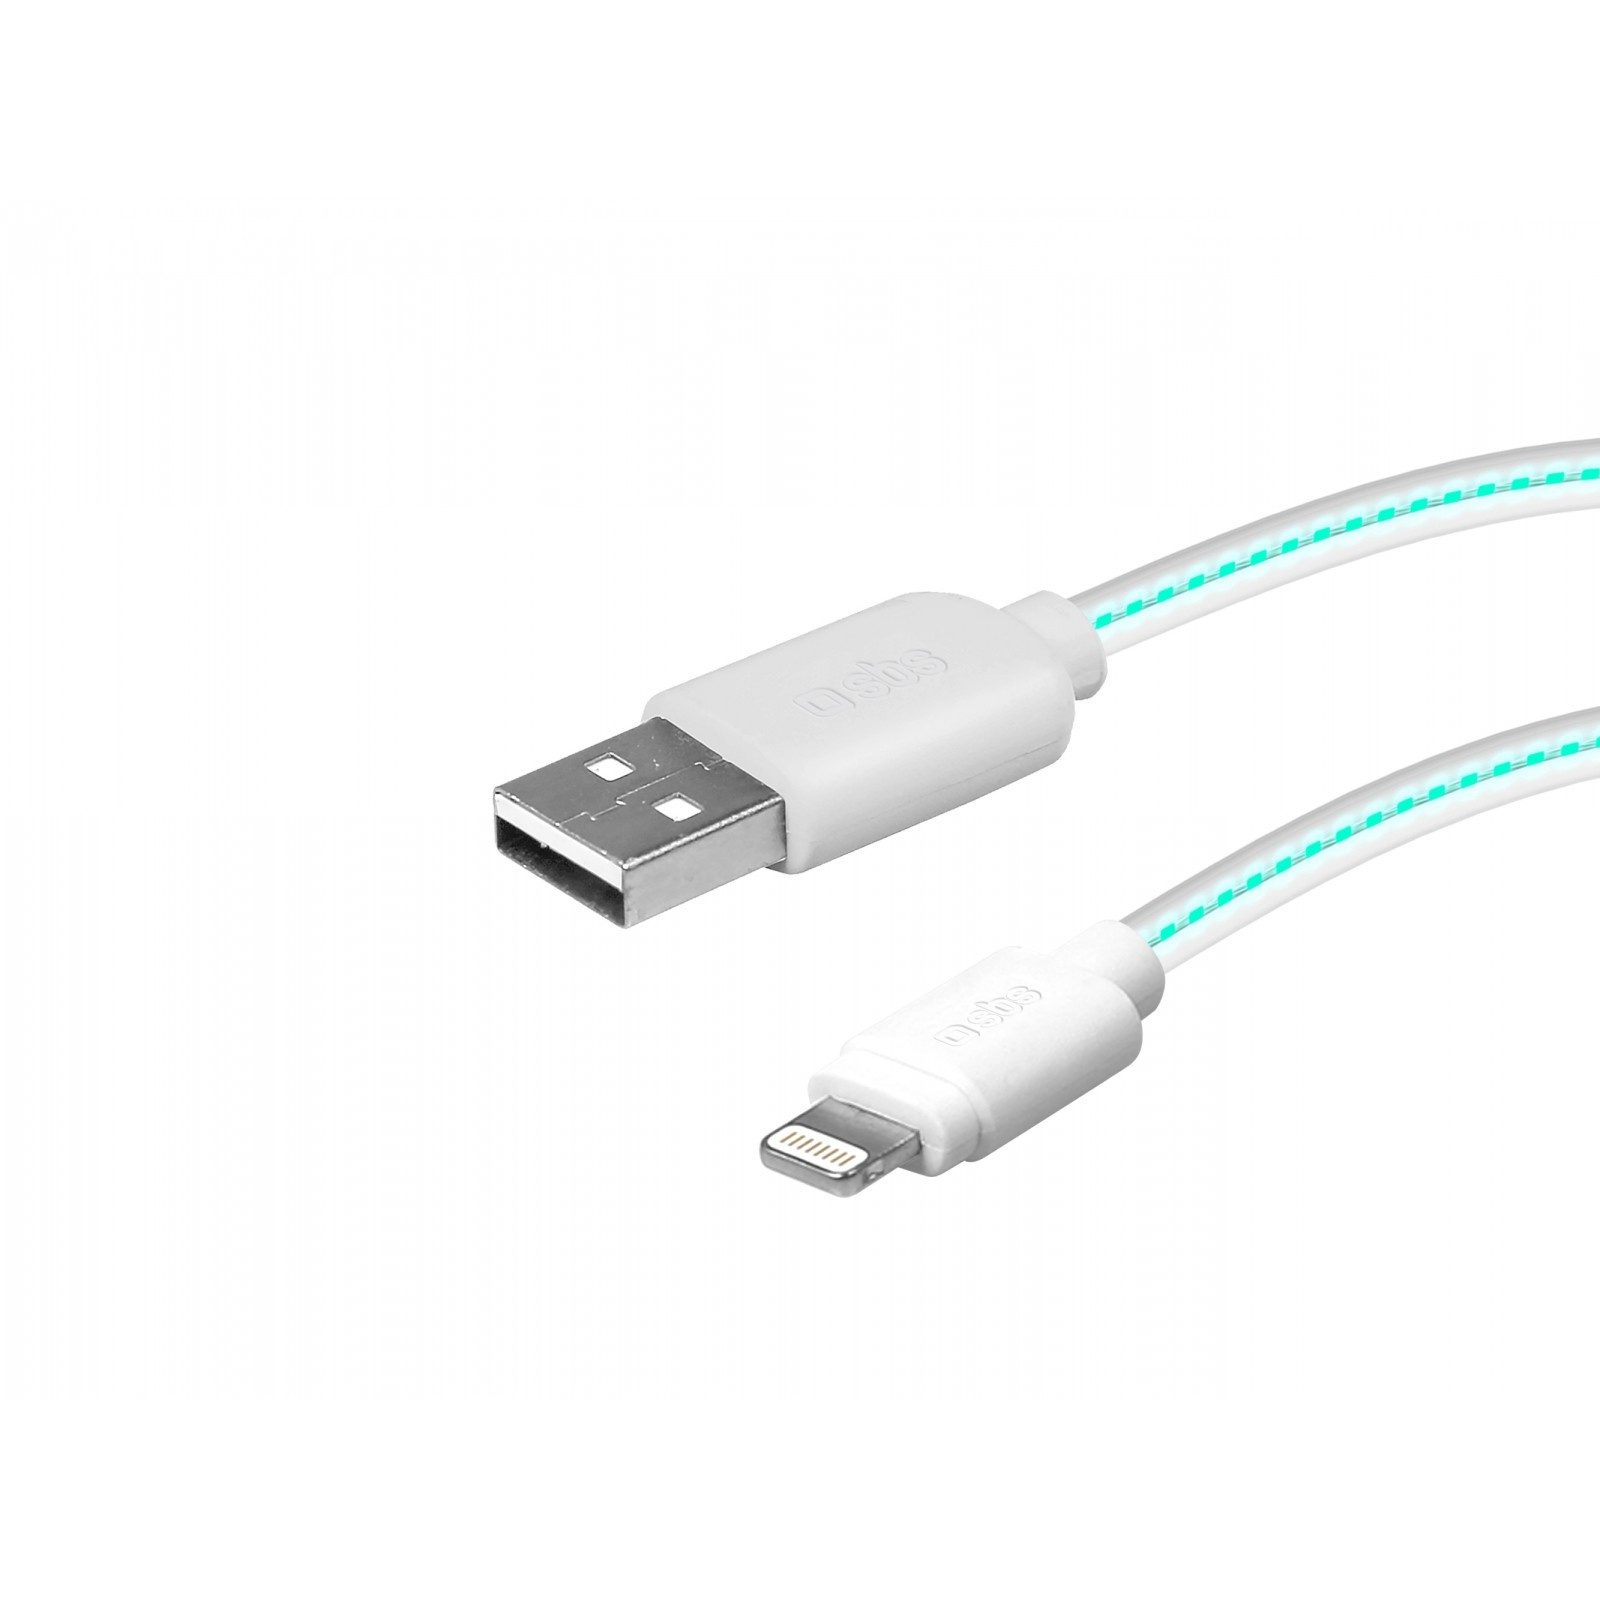 SBS Otg Cable for Tablet and Smartphone Samsung and more.